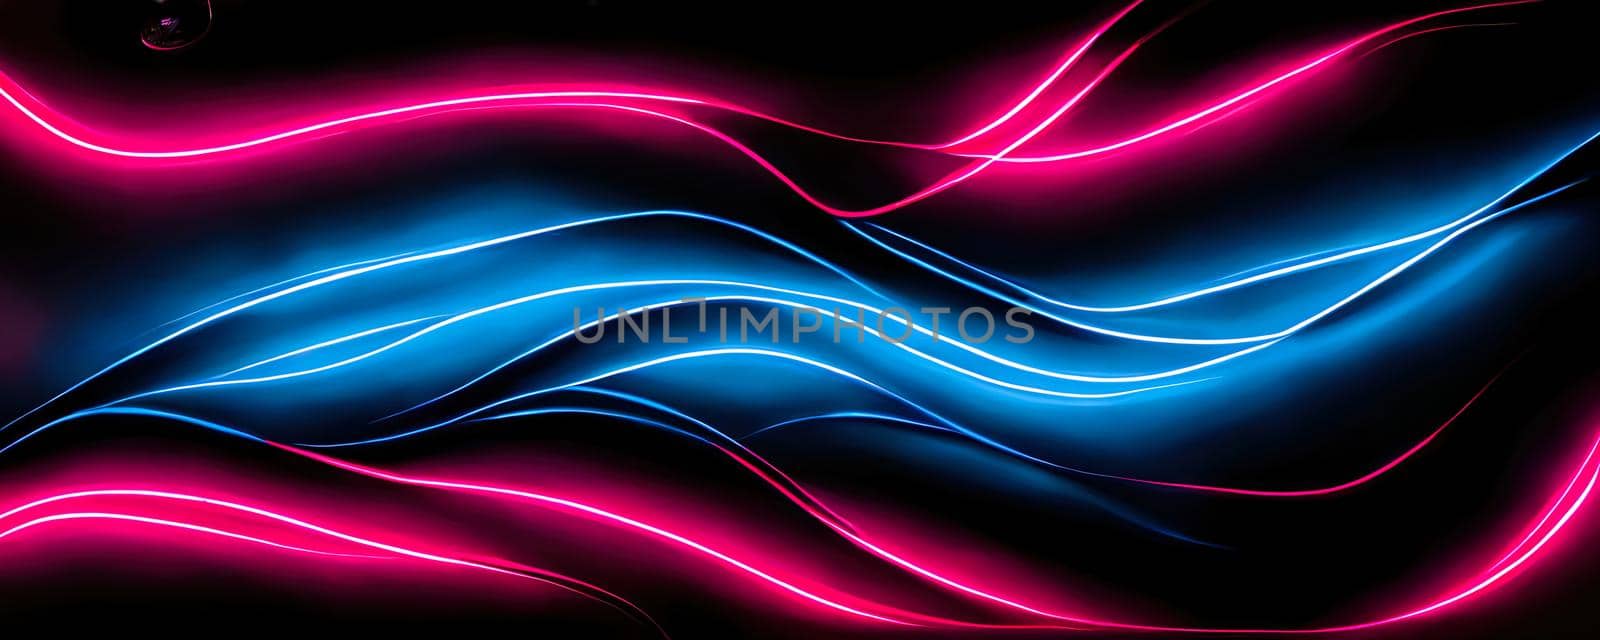 abstract neon waves on a black background in pink and blue.